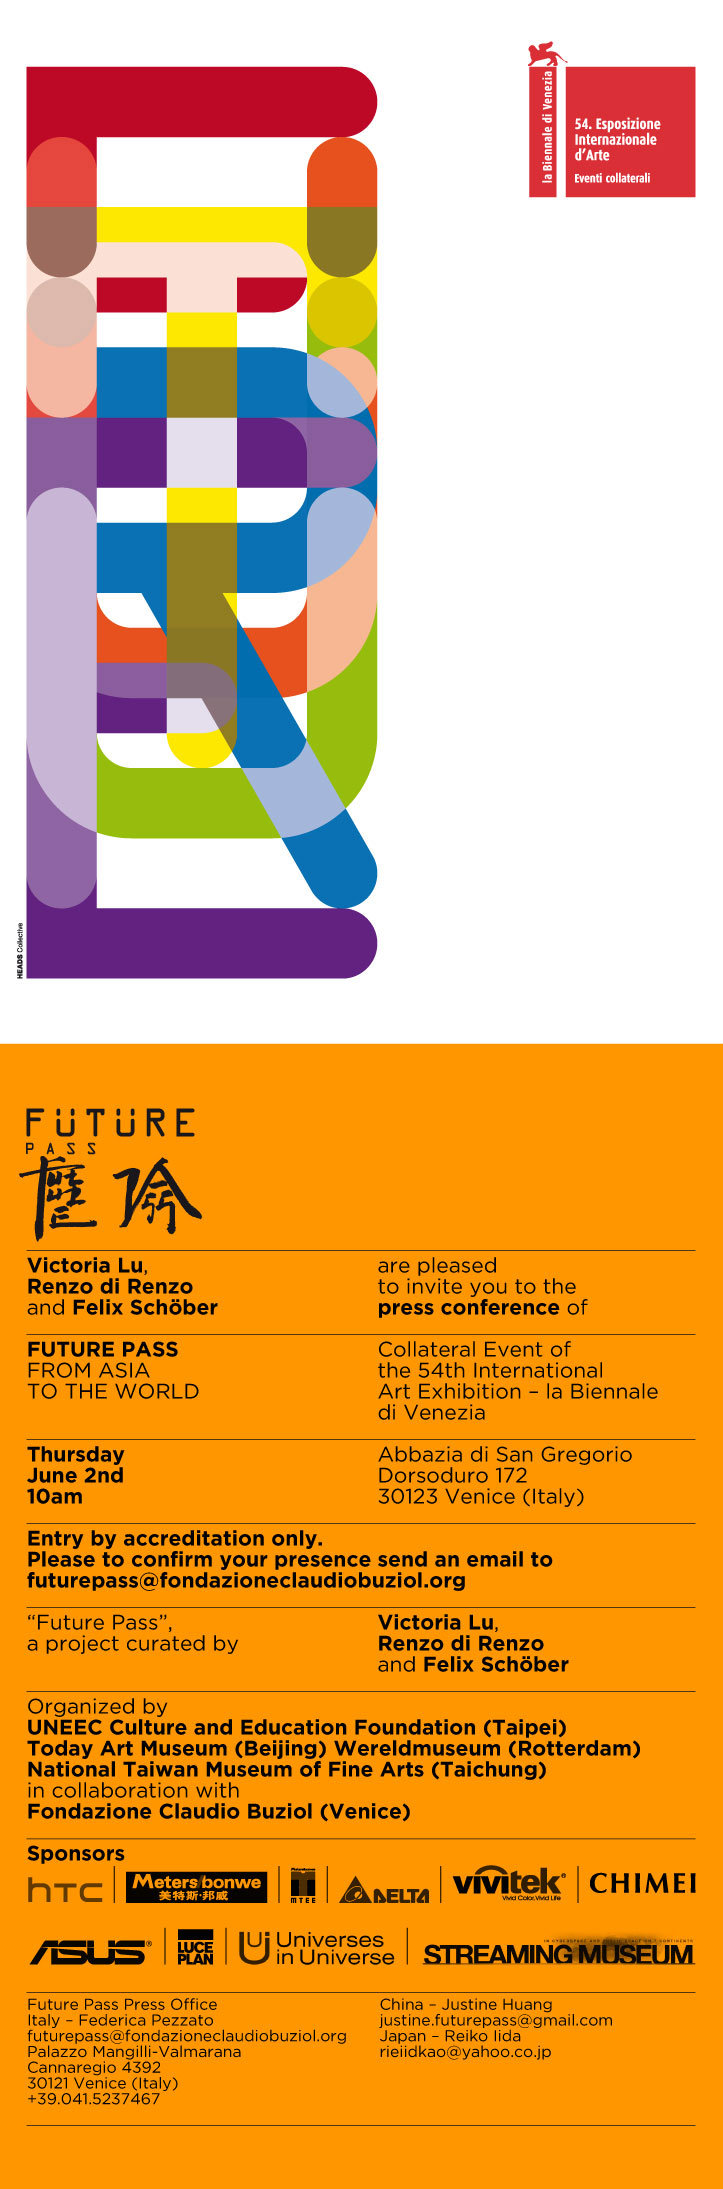 Future Pass – From Asia to the World